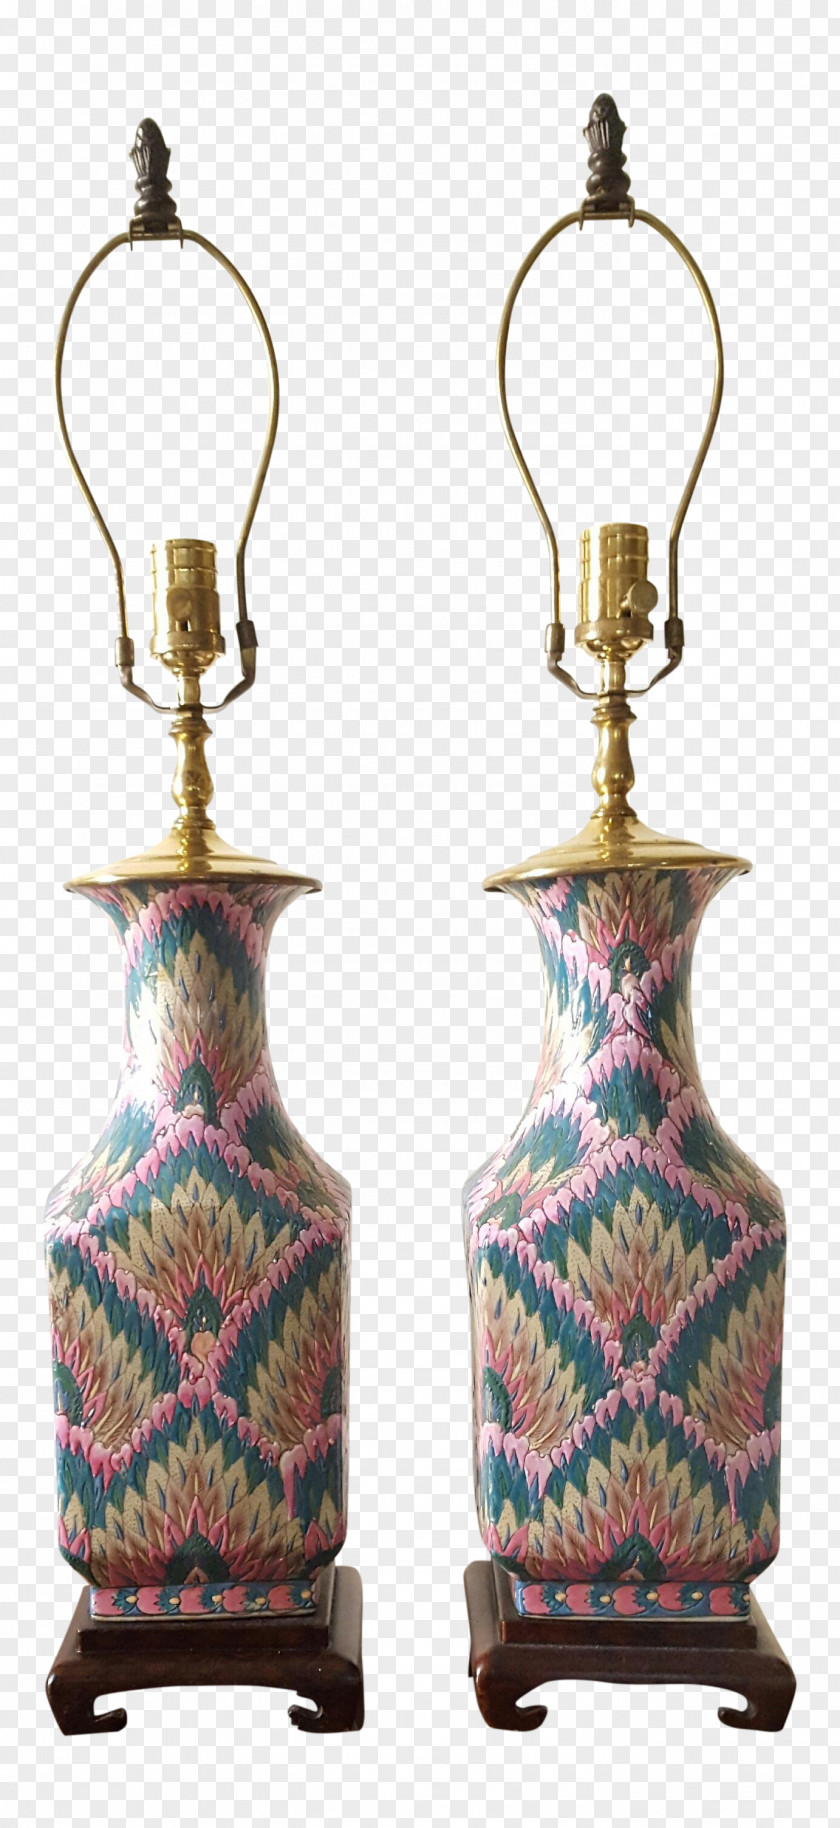 Chinoiserie Vase 01504 Artifact PNG